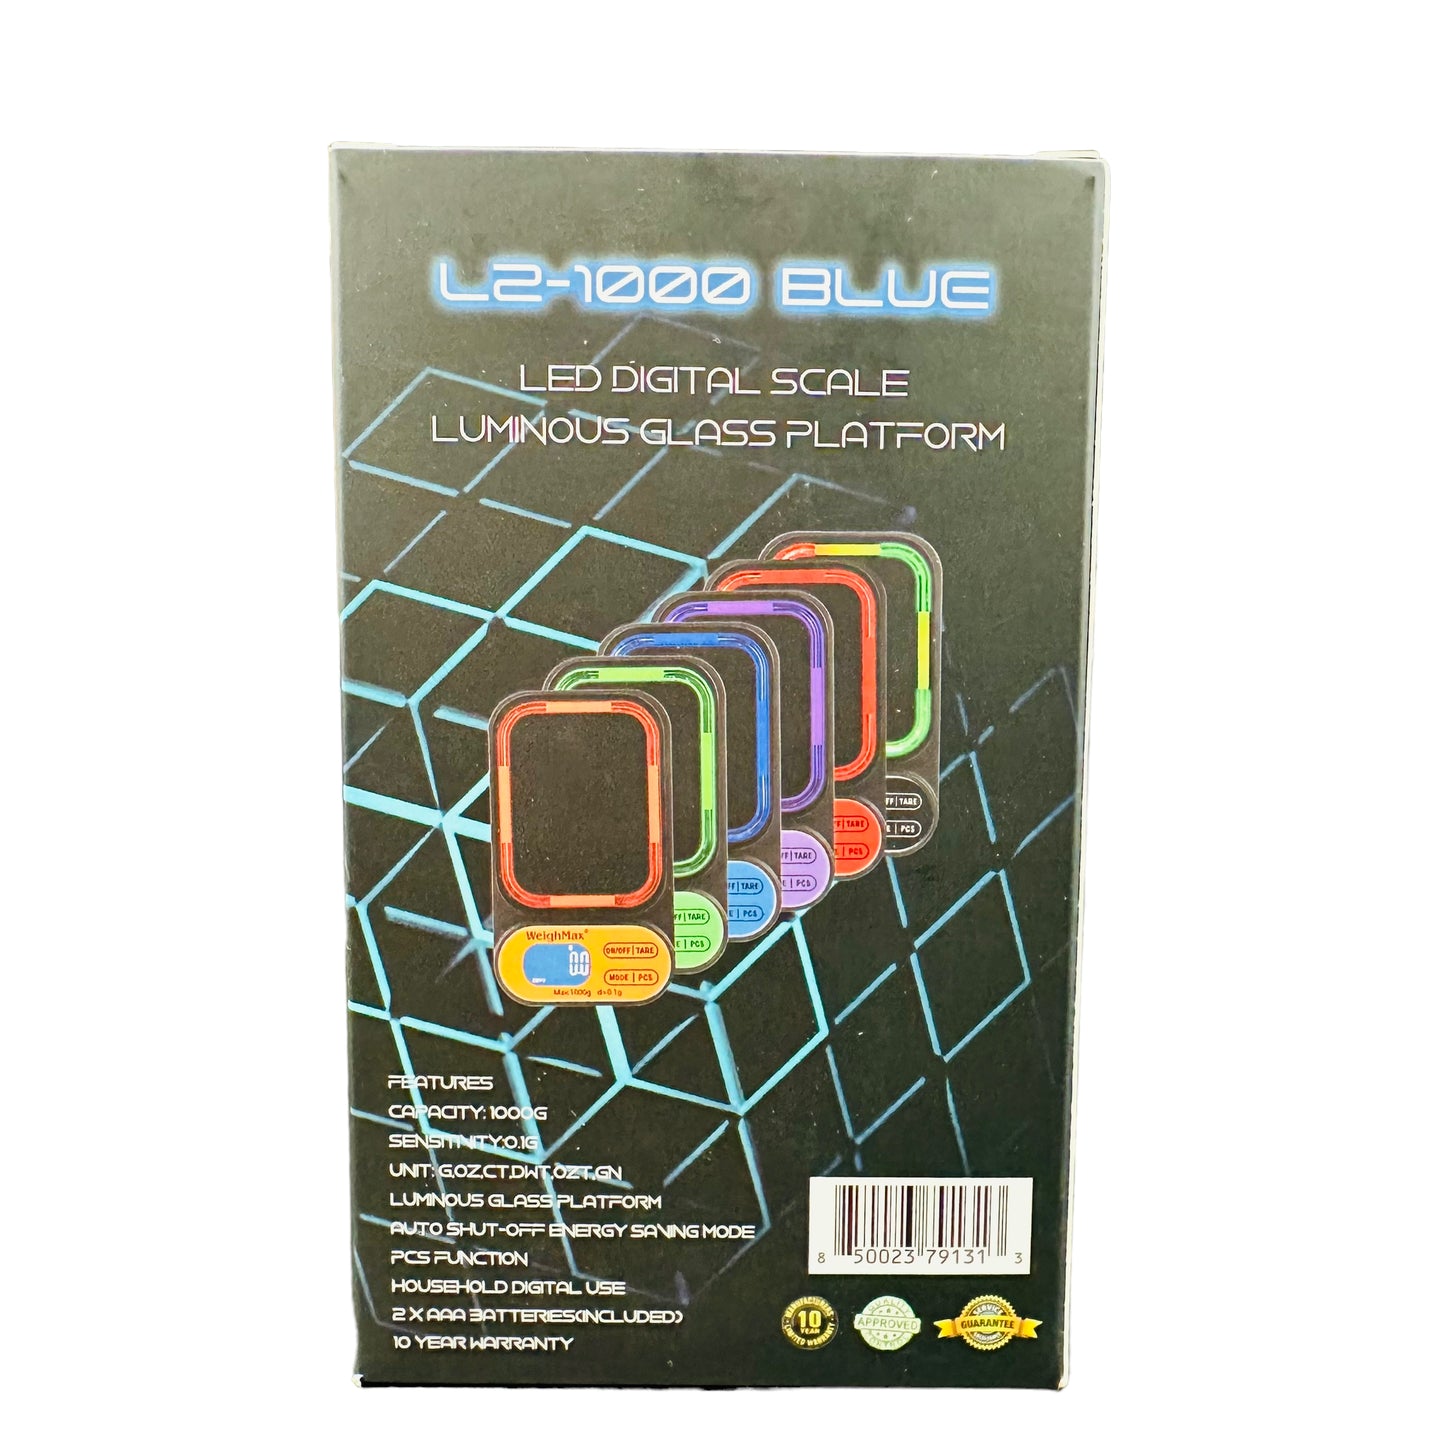 L2-1000 by Weighmax (Color Options Available) (B2B)